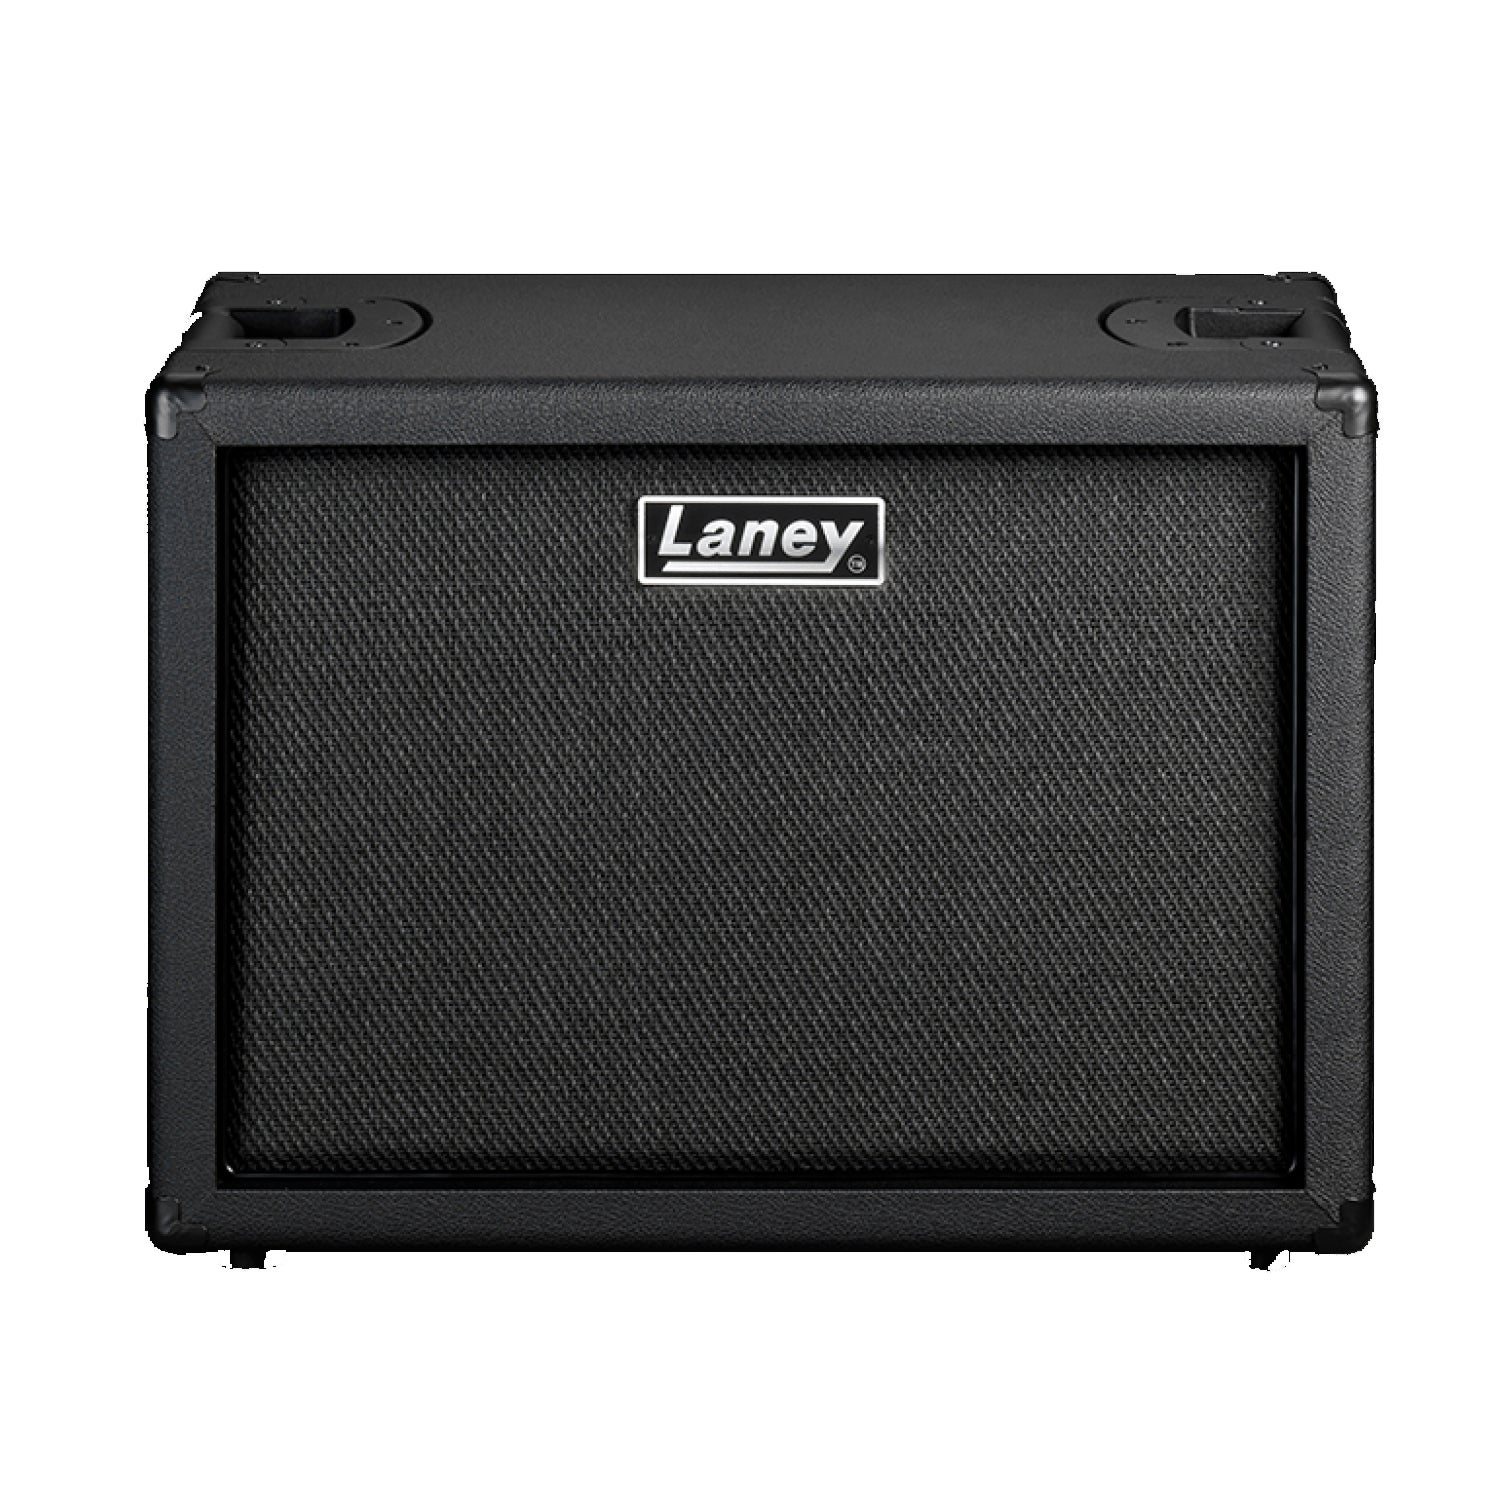 Laney Gs112 Ie Electric Guitar Speaker Cabinet 1x12 80w Music Works